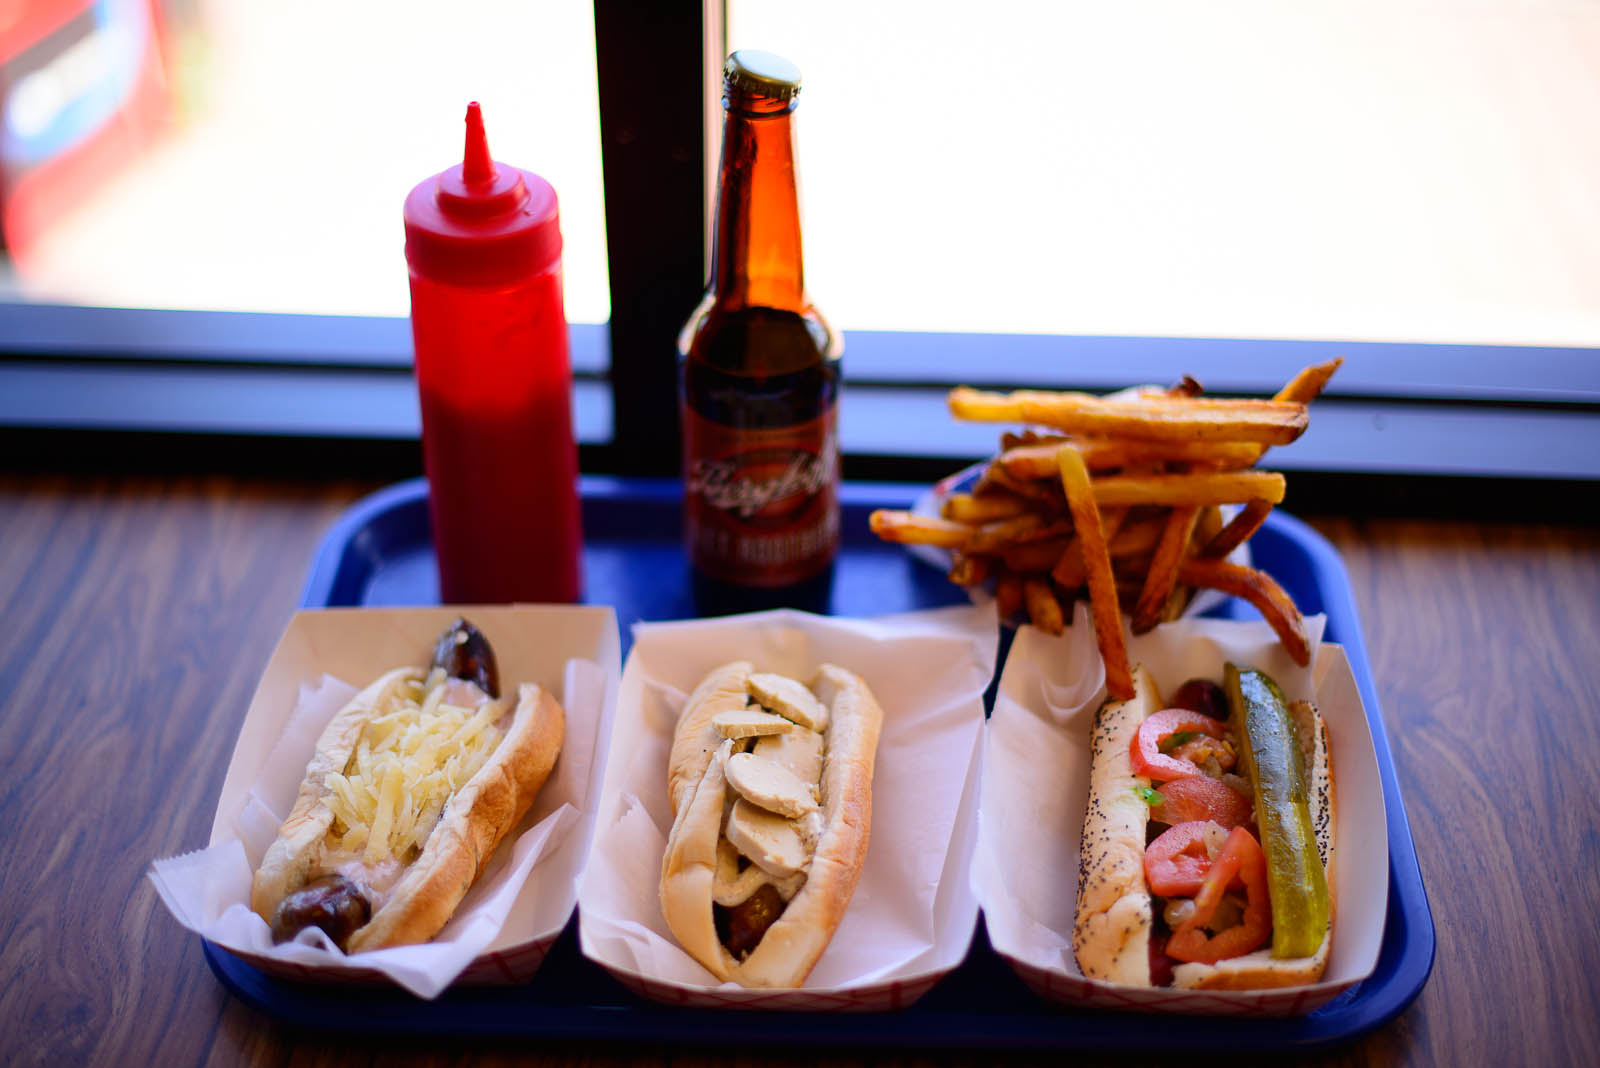 The mountain man, foie gras, and traditional Chicago dog with fr